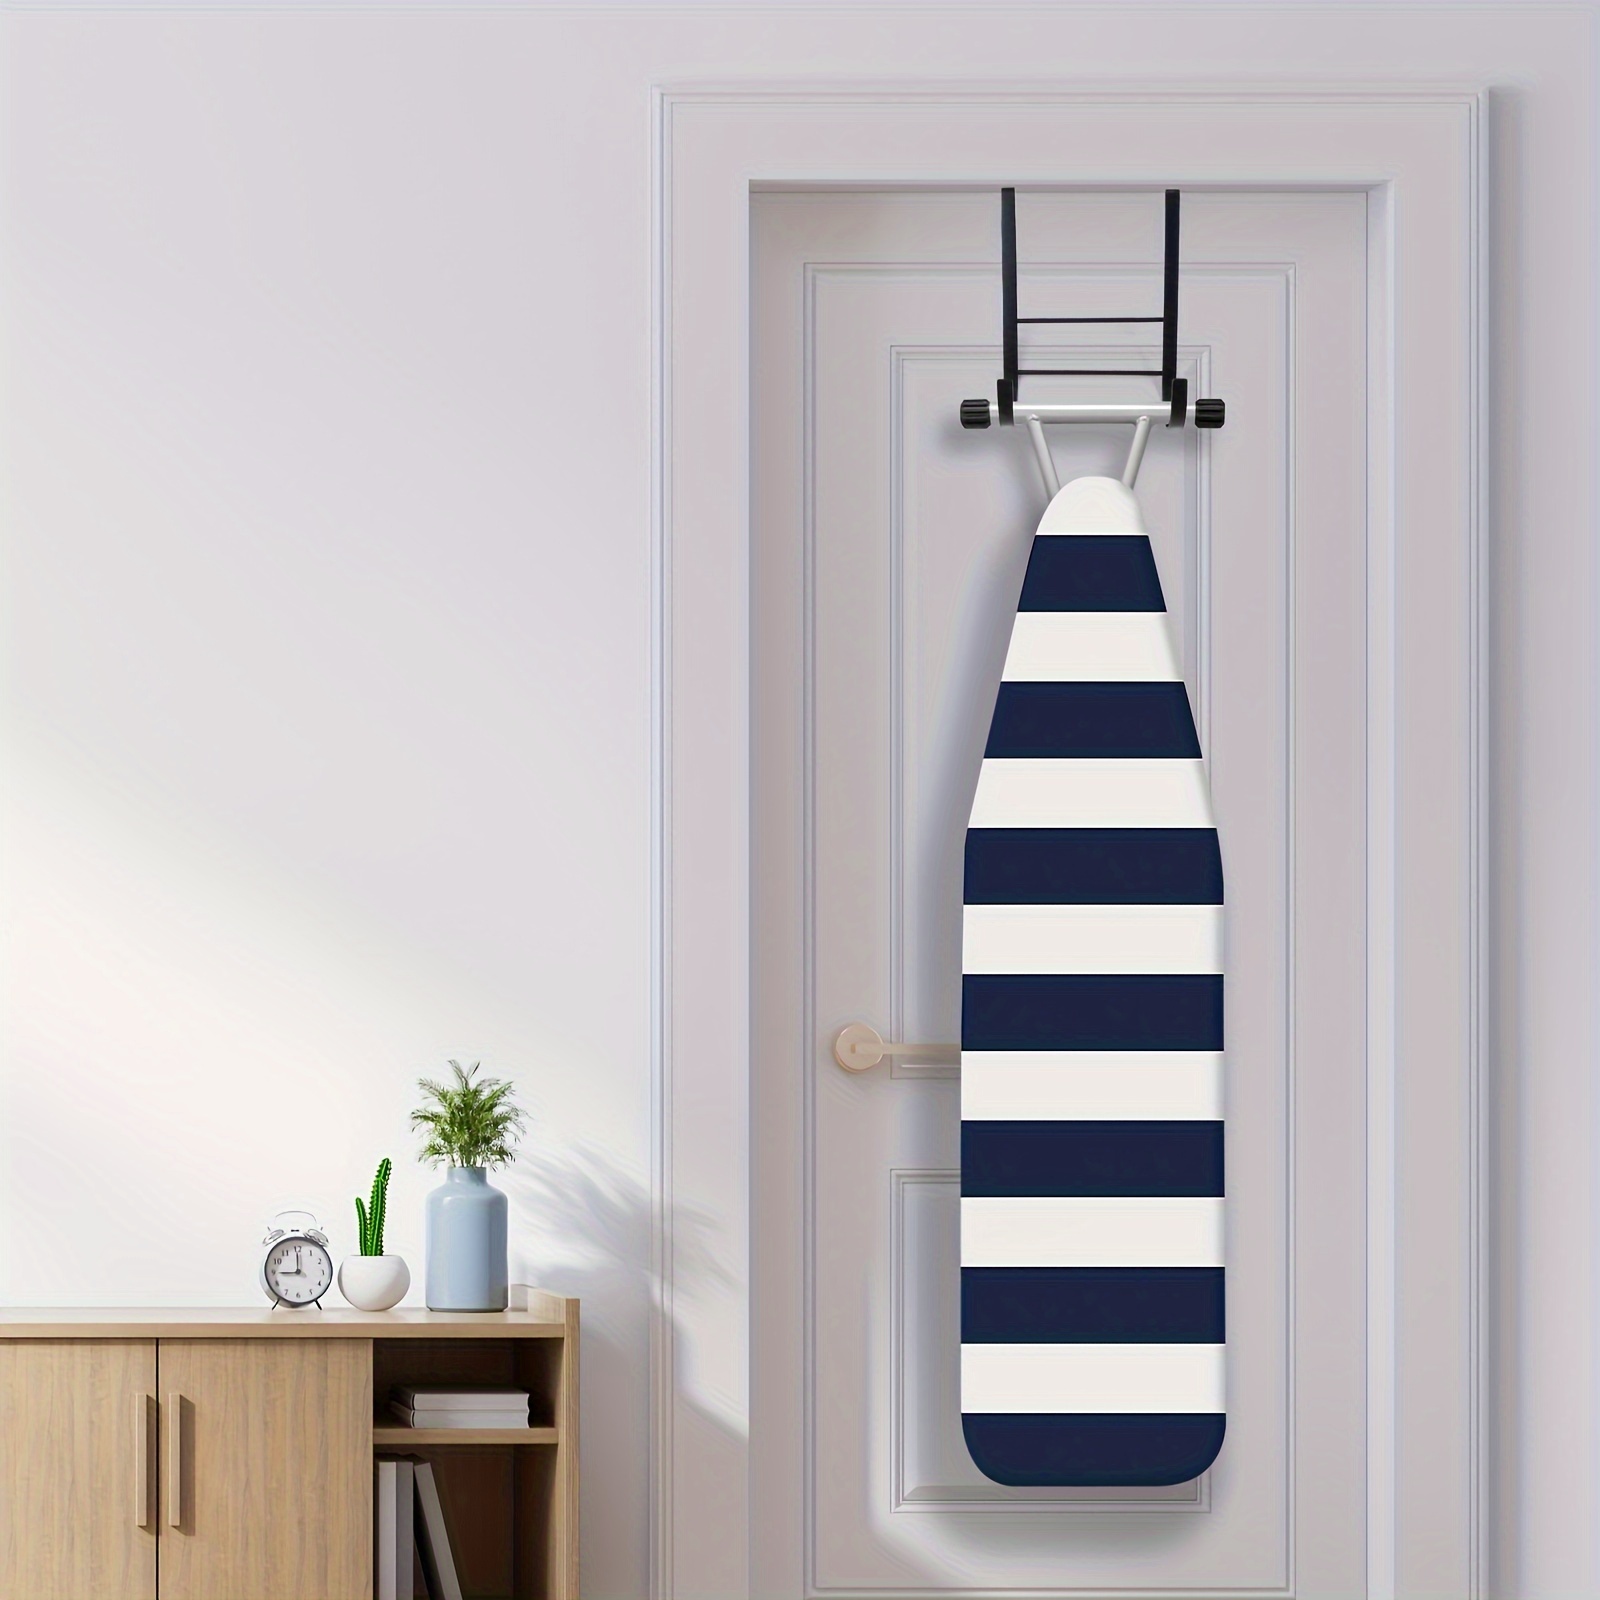 

1pc, Over The Door Ironing Board Holder - No-installation Storage Organizer For Laundry Room, Kitchen, Home, Wardrobe, Closet, & Bedroom/ Rubberized Hook Ends For No Damage